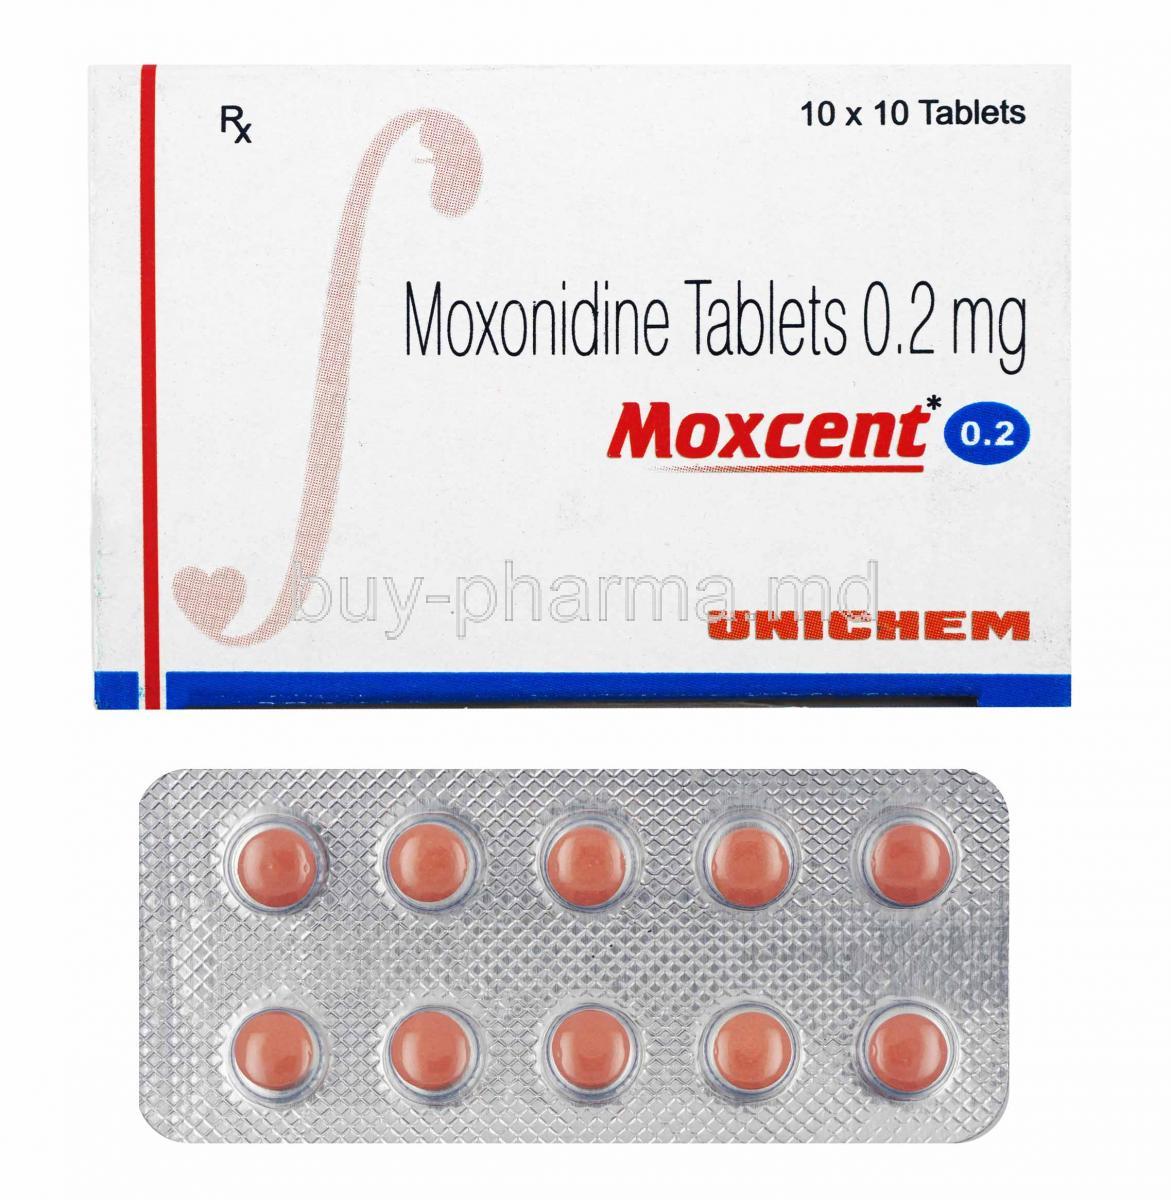 Moxcent, Moxonidine 0.2mg box and tablets